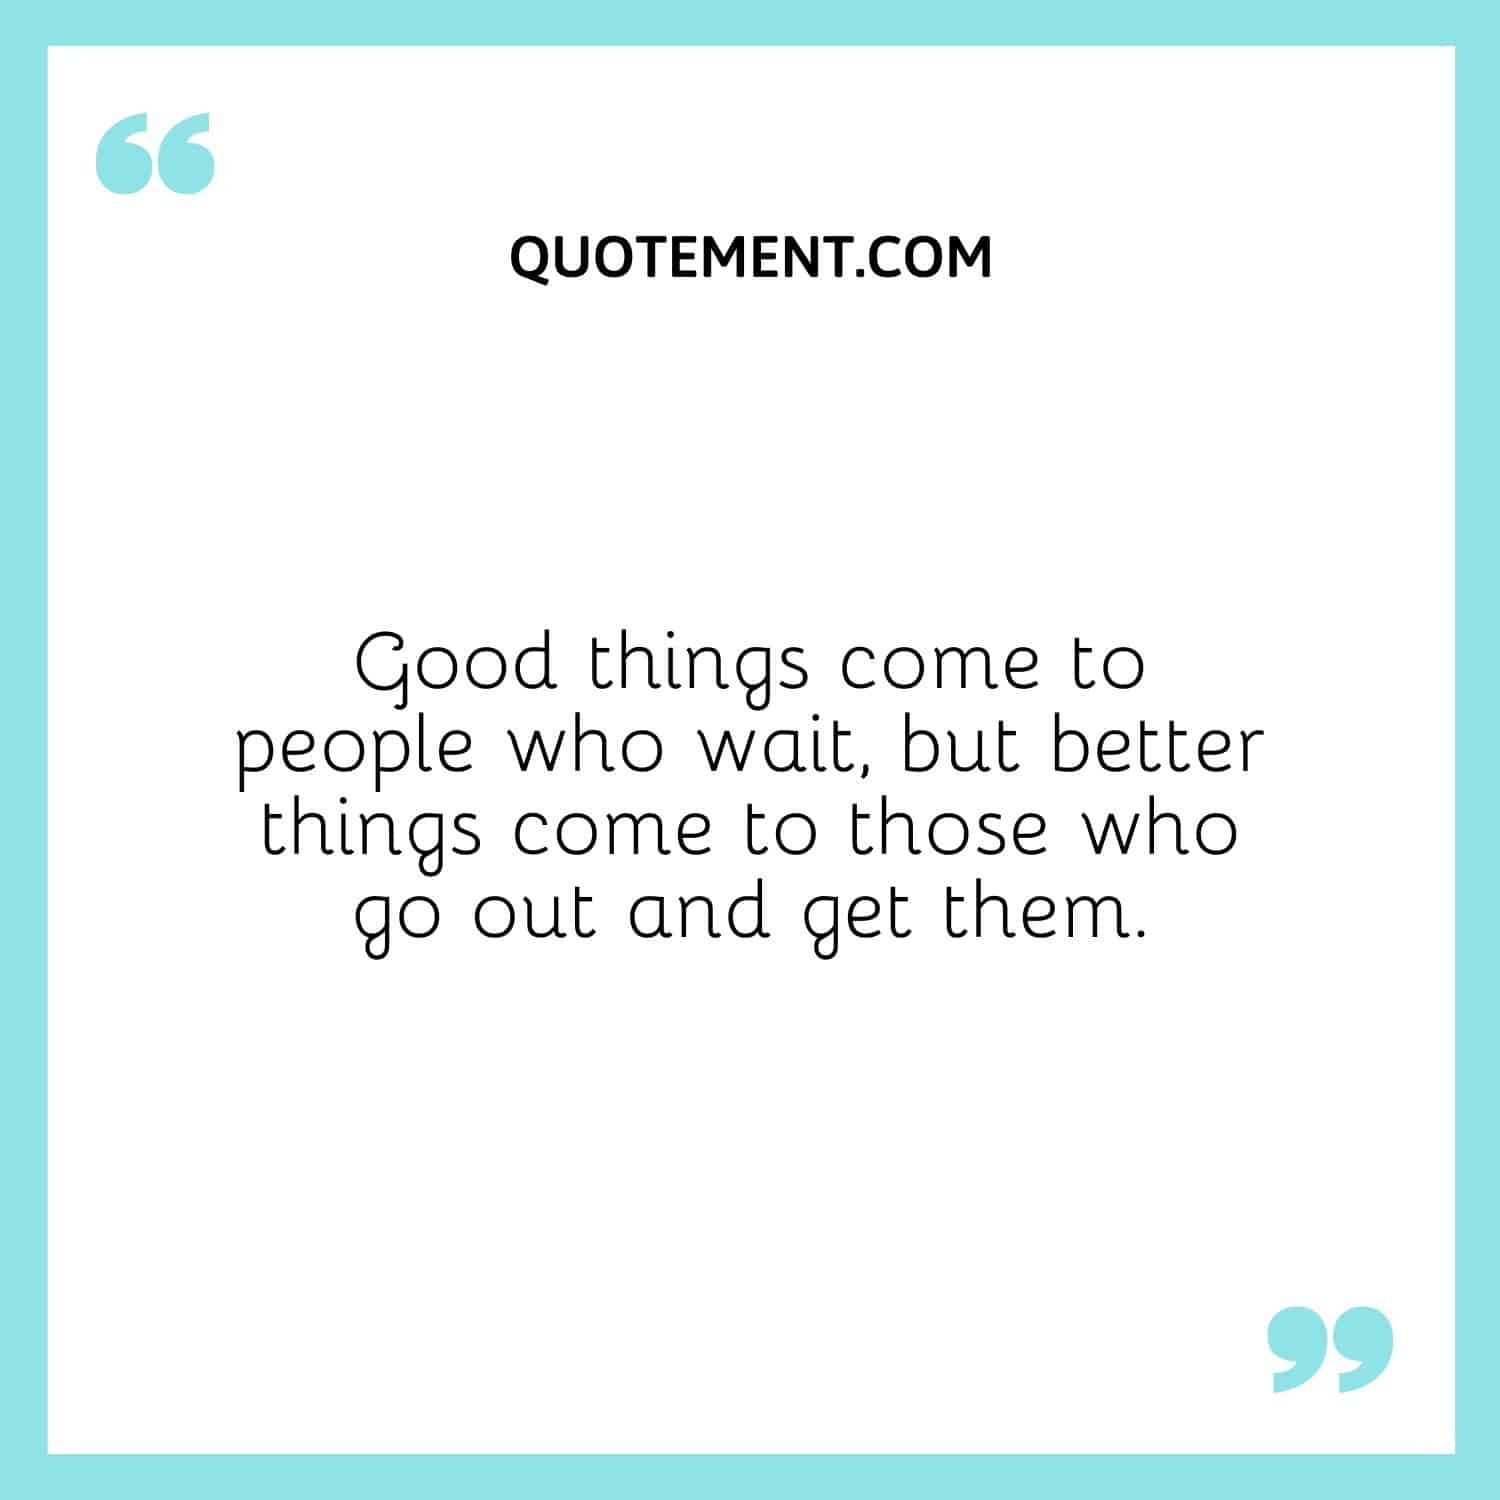 Good things come to people who wait, but better things come to those who go out and get them.